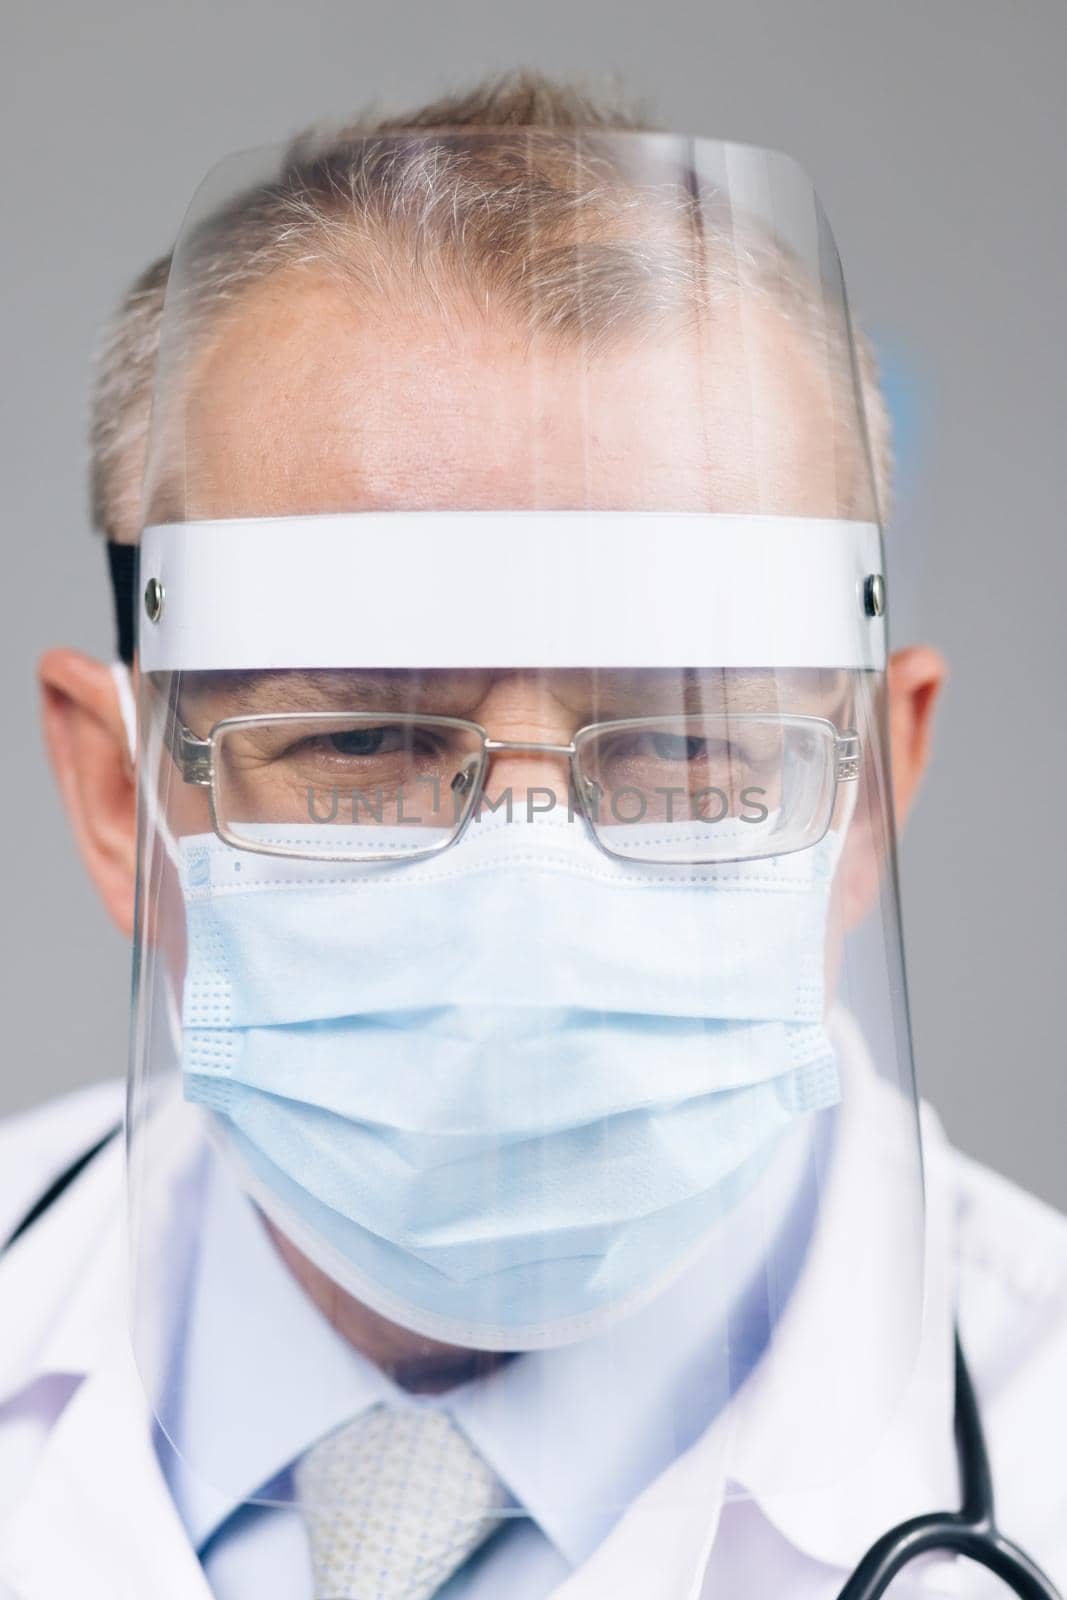 Doctor in Glasses is Wearing a Transparent Protective Face Shield, Mask and Overalls in a Hospital Room. Covid-19 Pandemic Concept About Slow Spread of Infectious Virus. by uflypro